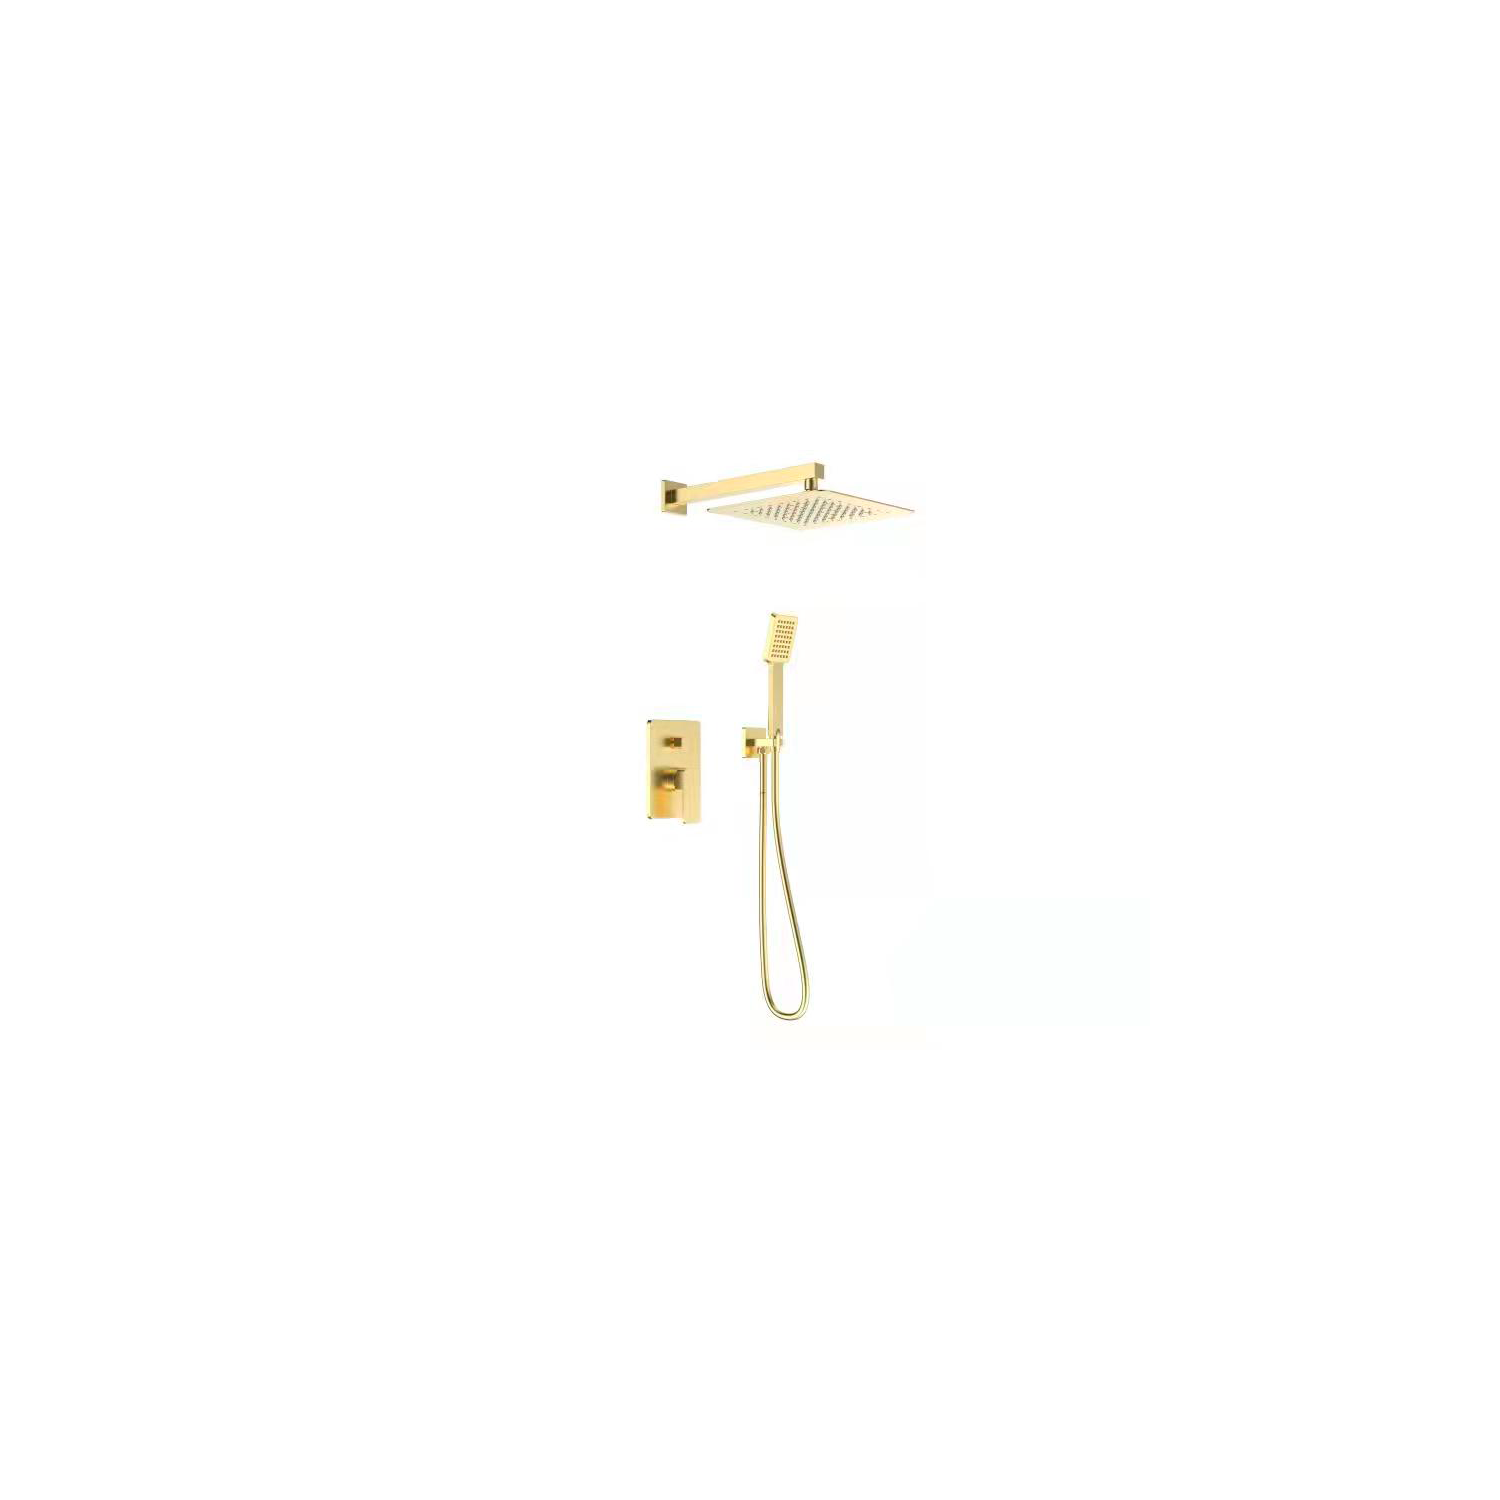 DAX Square Shower System with Hand Shower Brushed Gold Finish (DAX-6813B-BG)